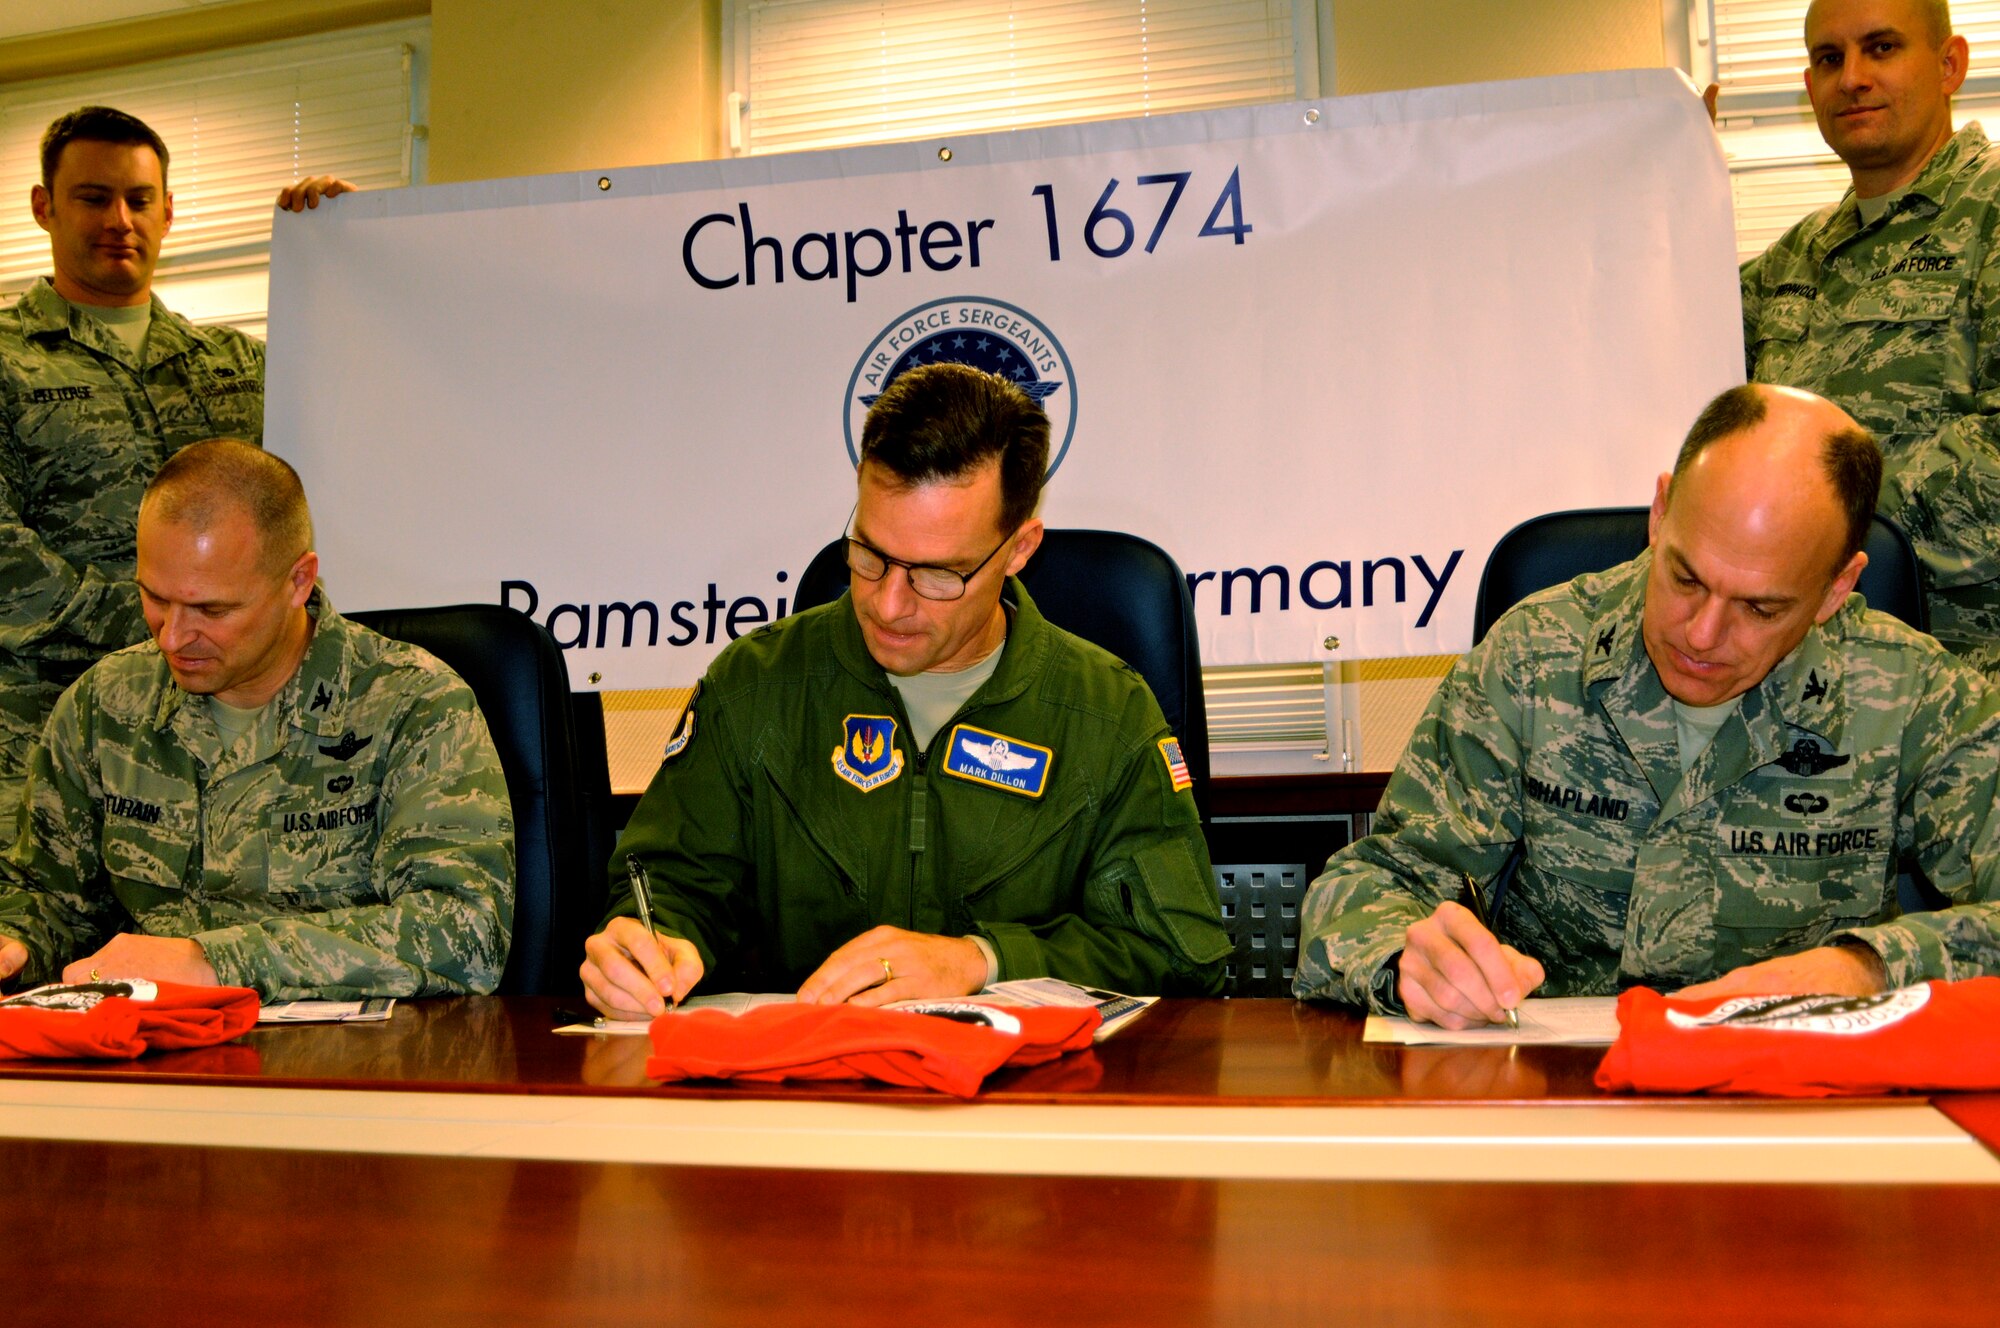 (From left) Col. Kip Turain, 521st Air Mobility Operations Wing commander; Brig. Gen. Mark Dillon, 86th Airlift Wing commander; and Col. John Shapland, 435th Air Ground Operations Wing commander, sign up for one year memberships with the Air Force Sergeants Association Feb. 9 in the 86th AW headquarters on Ramstein.  AFSA assists in drafting proposals for legislation on issues related to military members and their families. (U.S. Air Force photo by 2nd Lt. Lacie Collins)